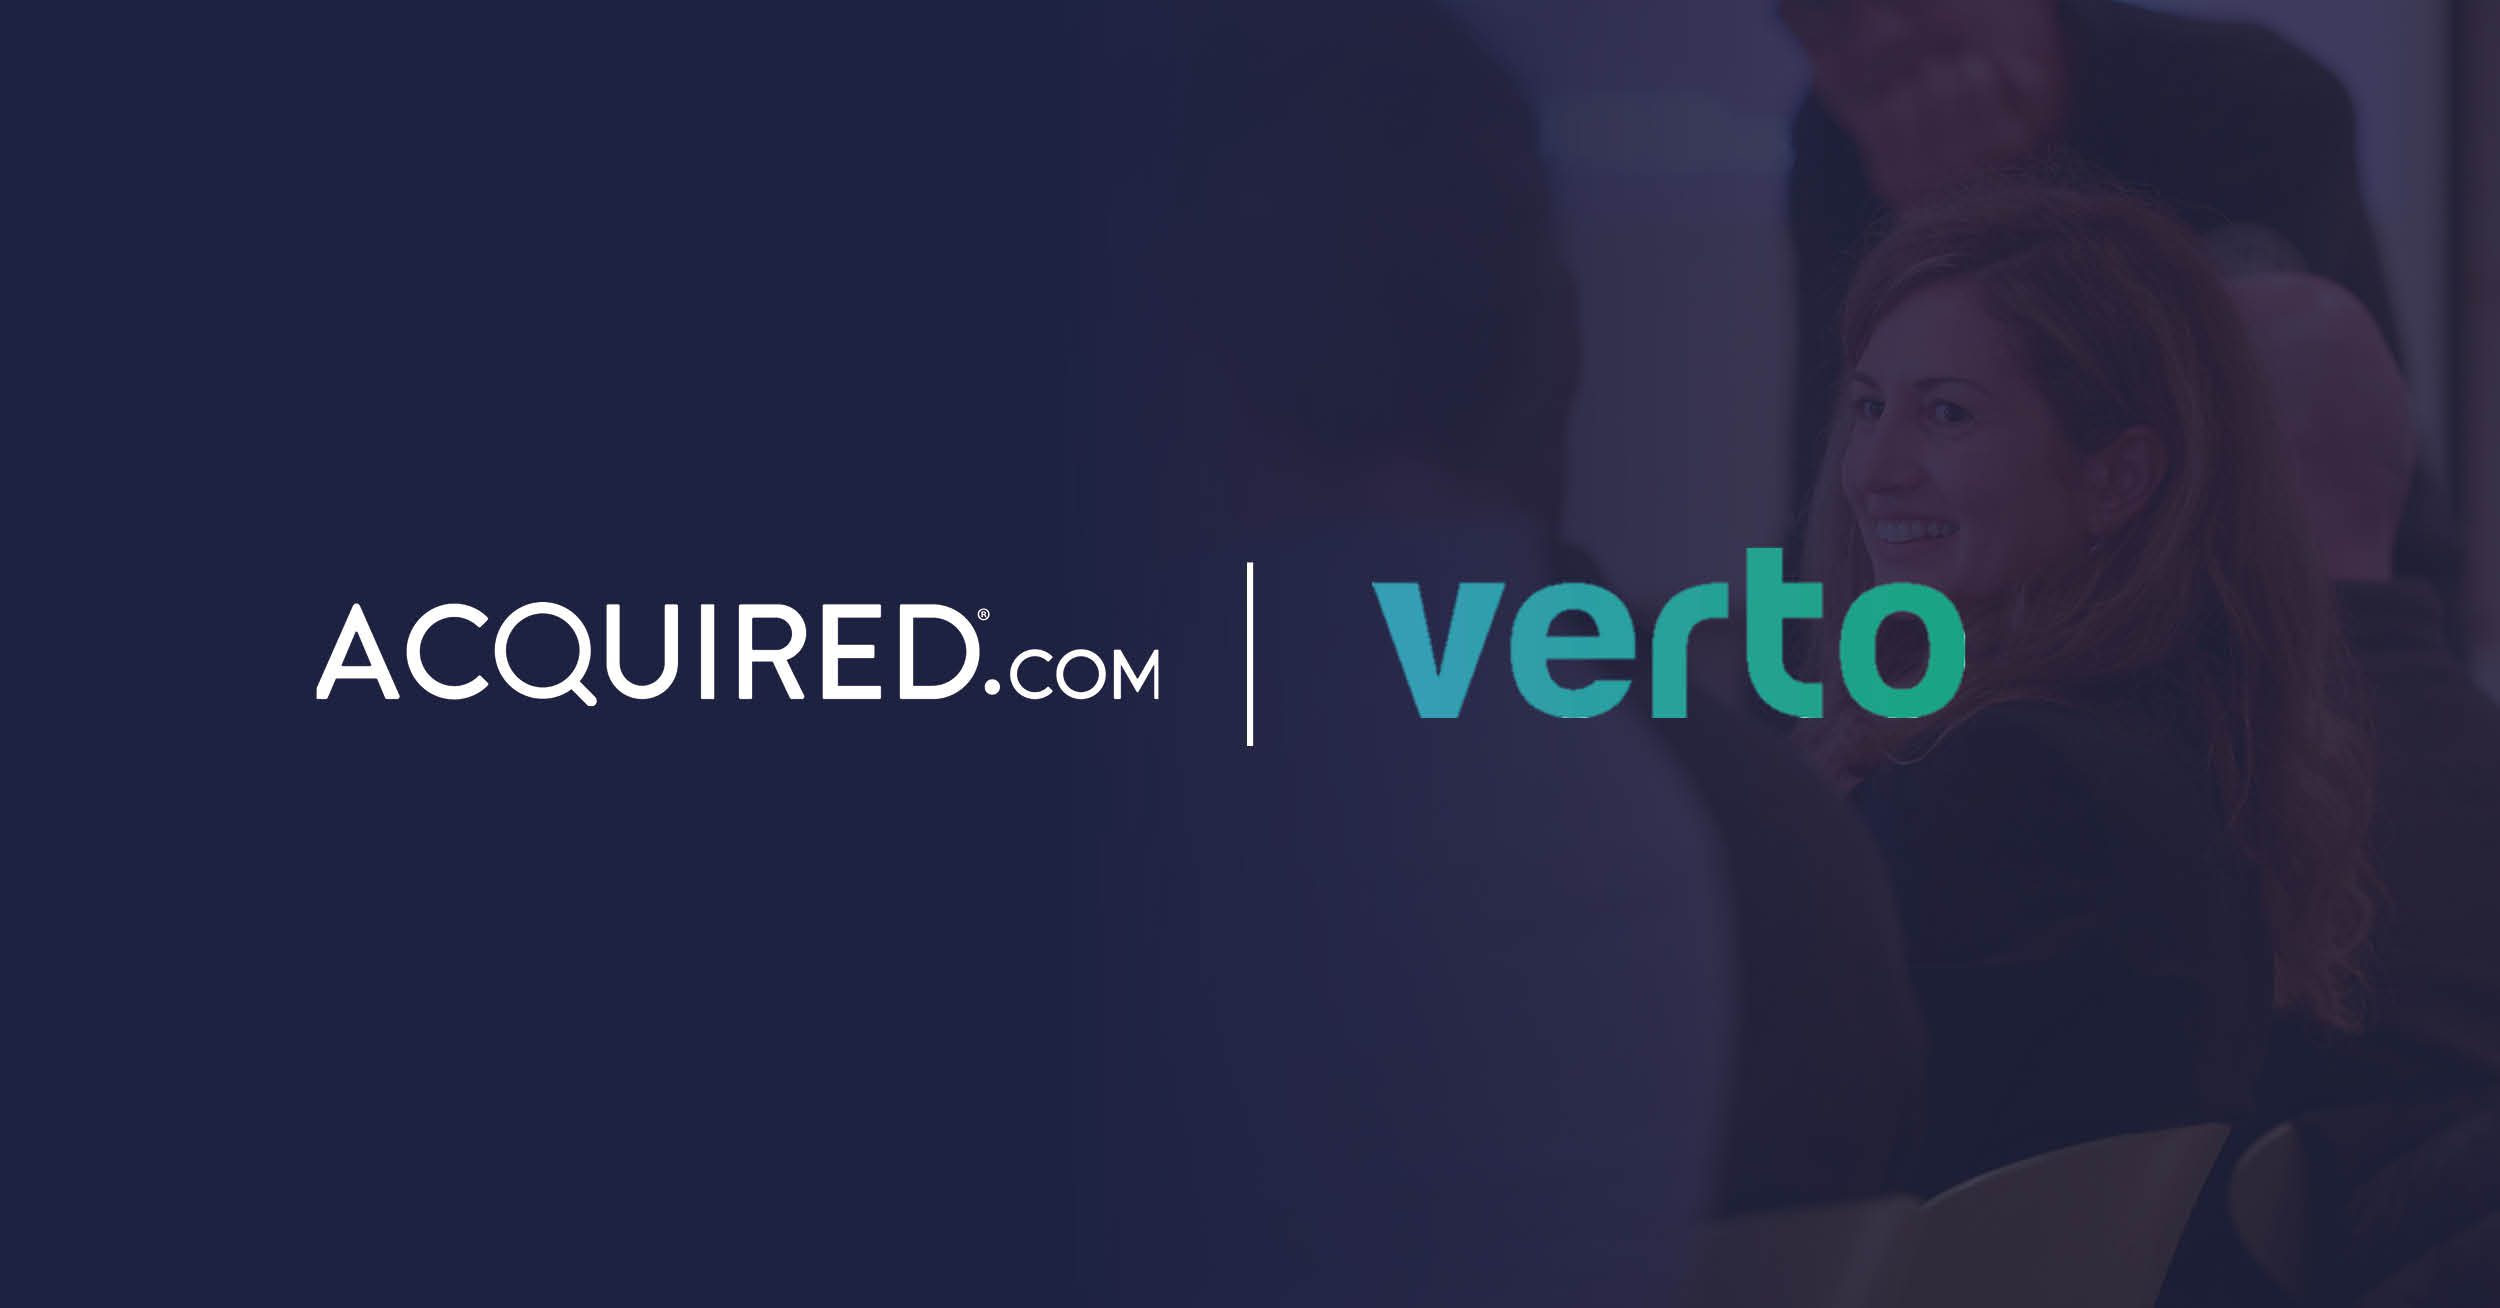 Acquired Verto Partnership Payments